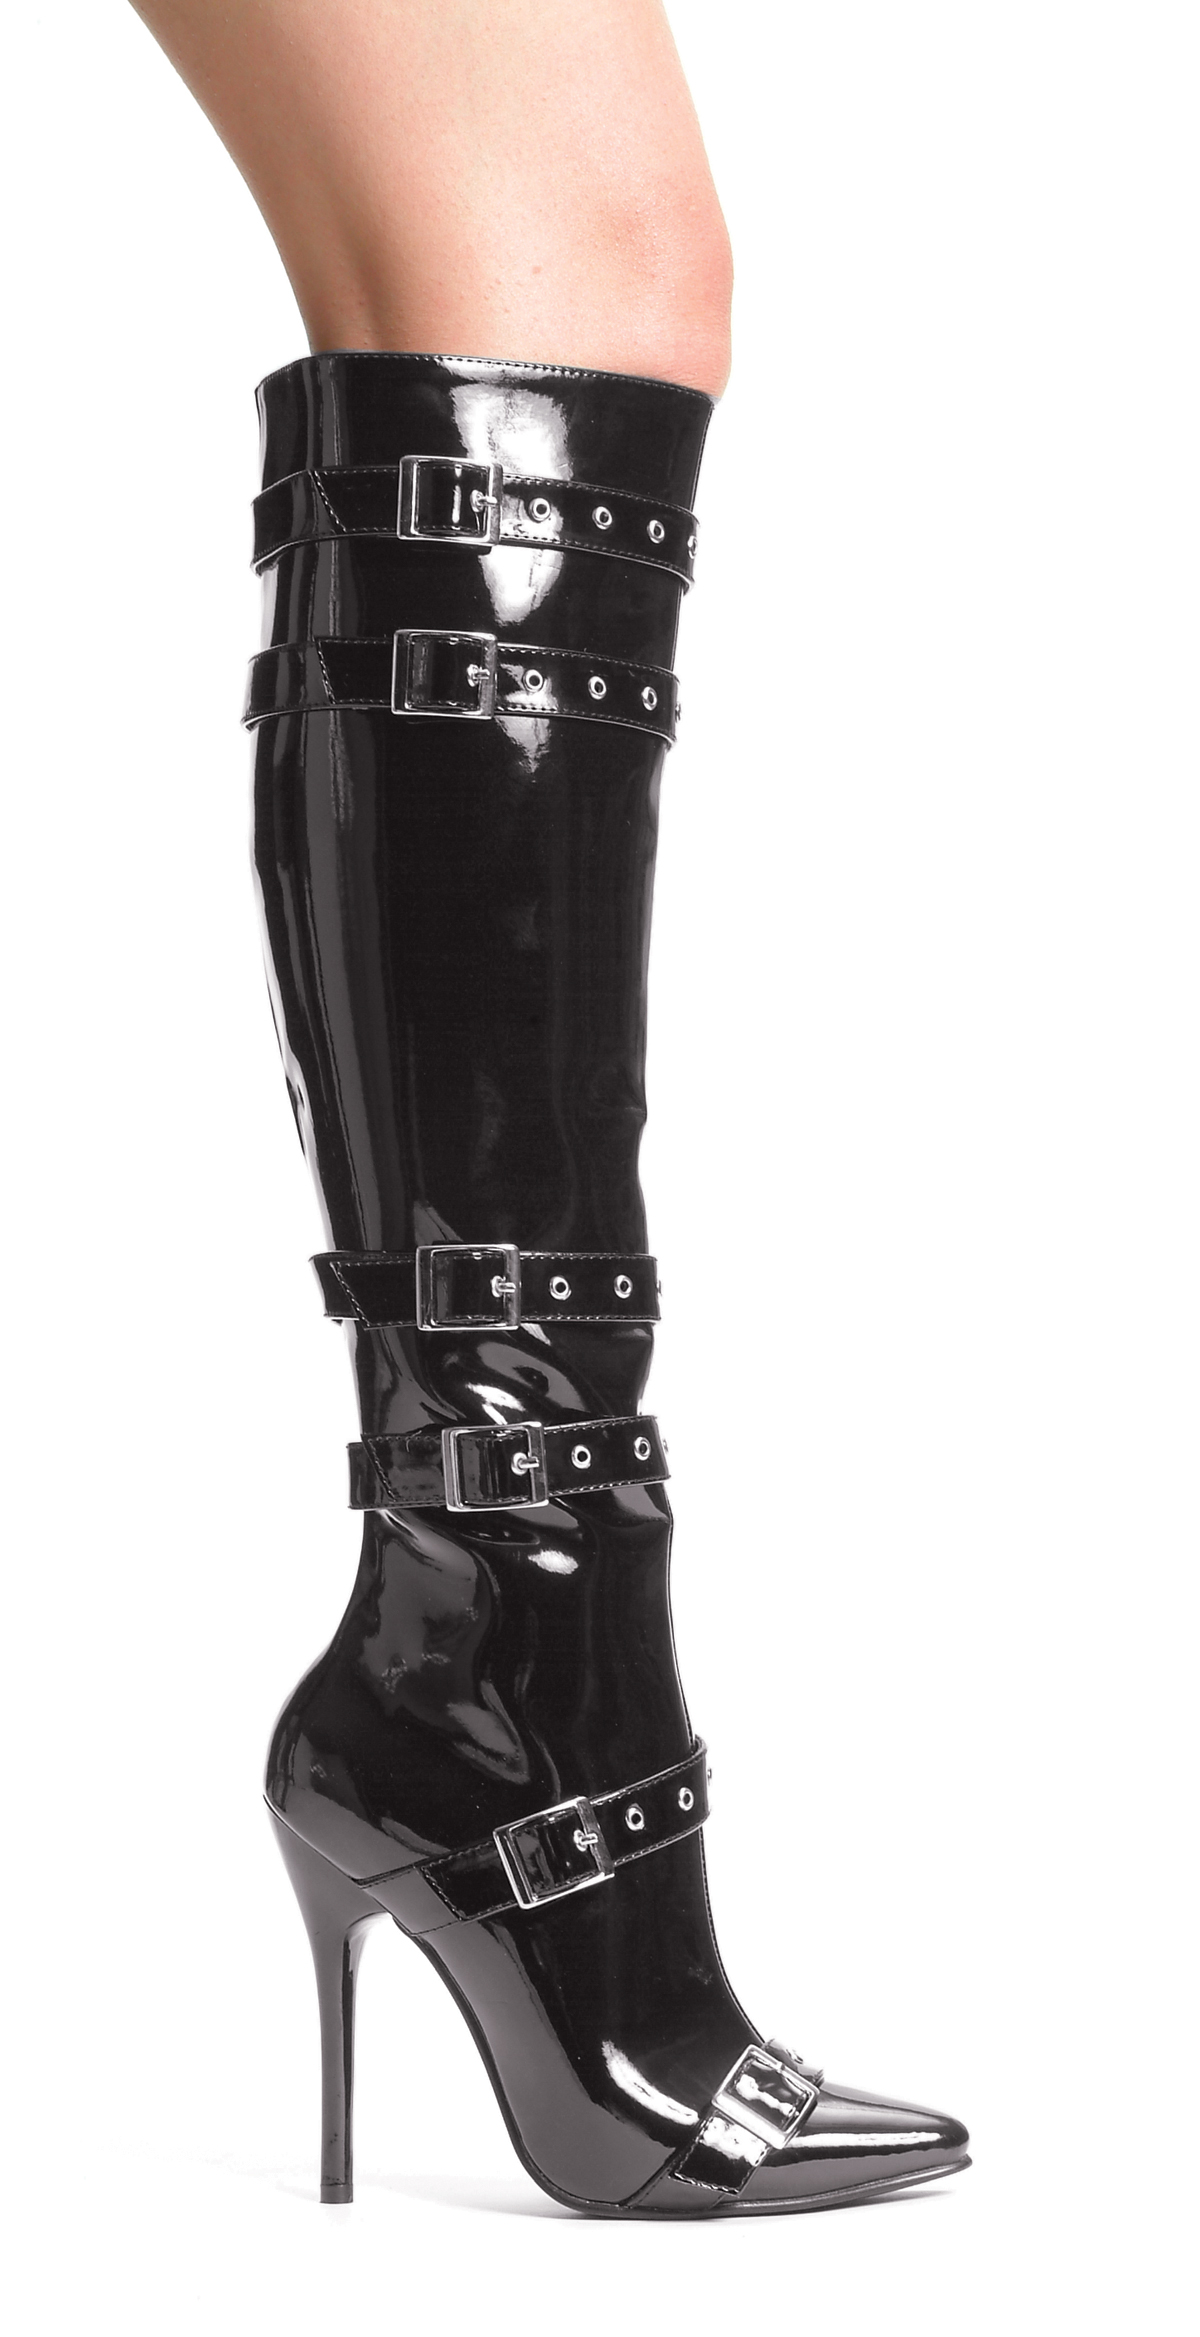 Lexi - 5 Inch Stiletto Boots with Buckle Straps